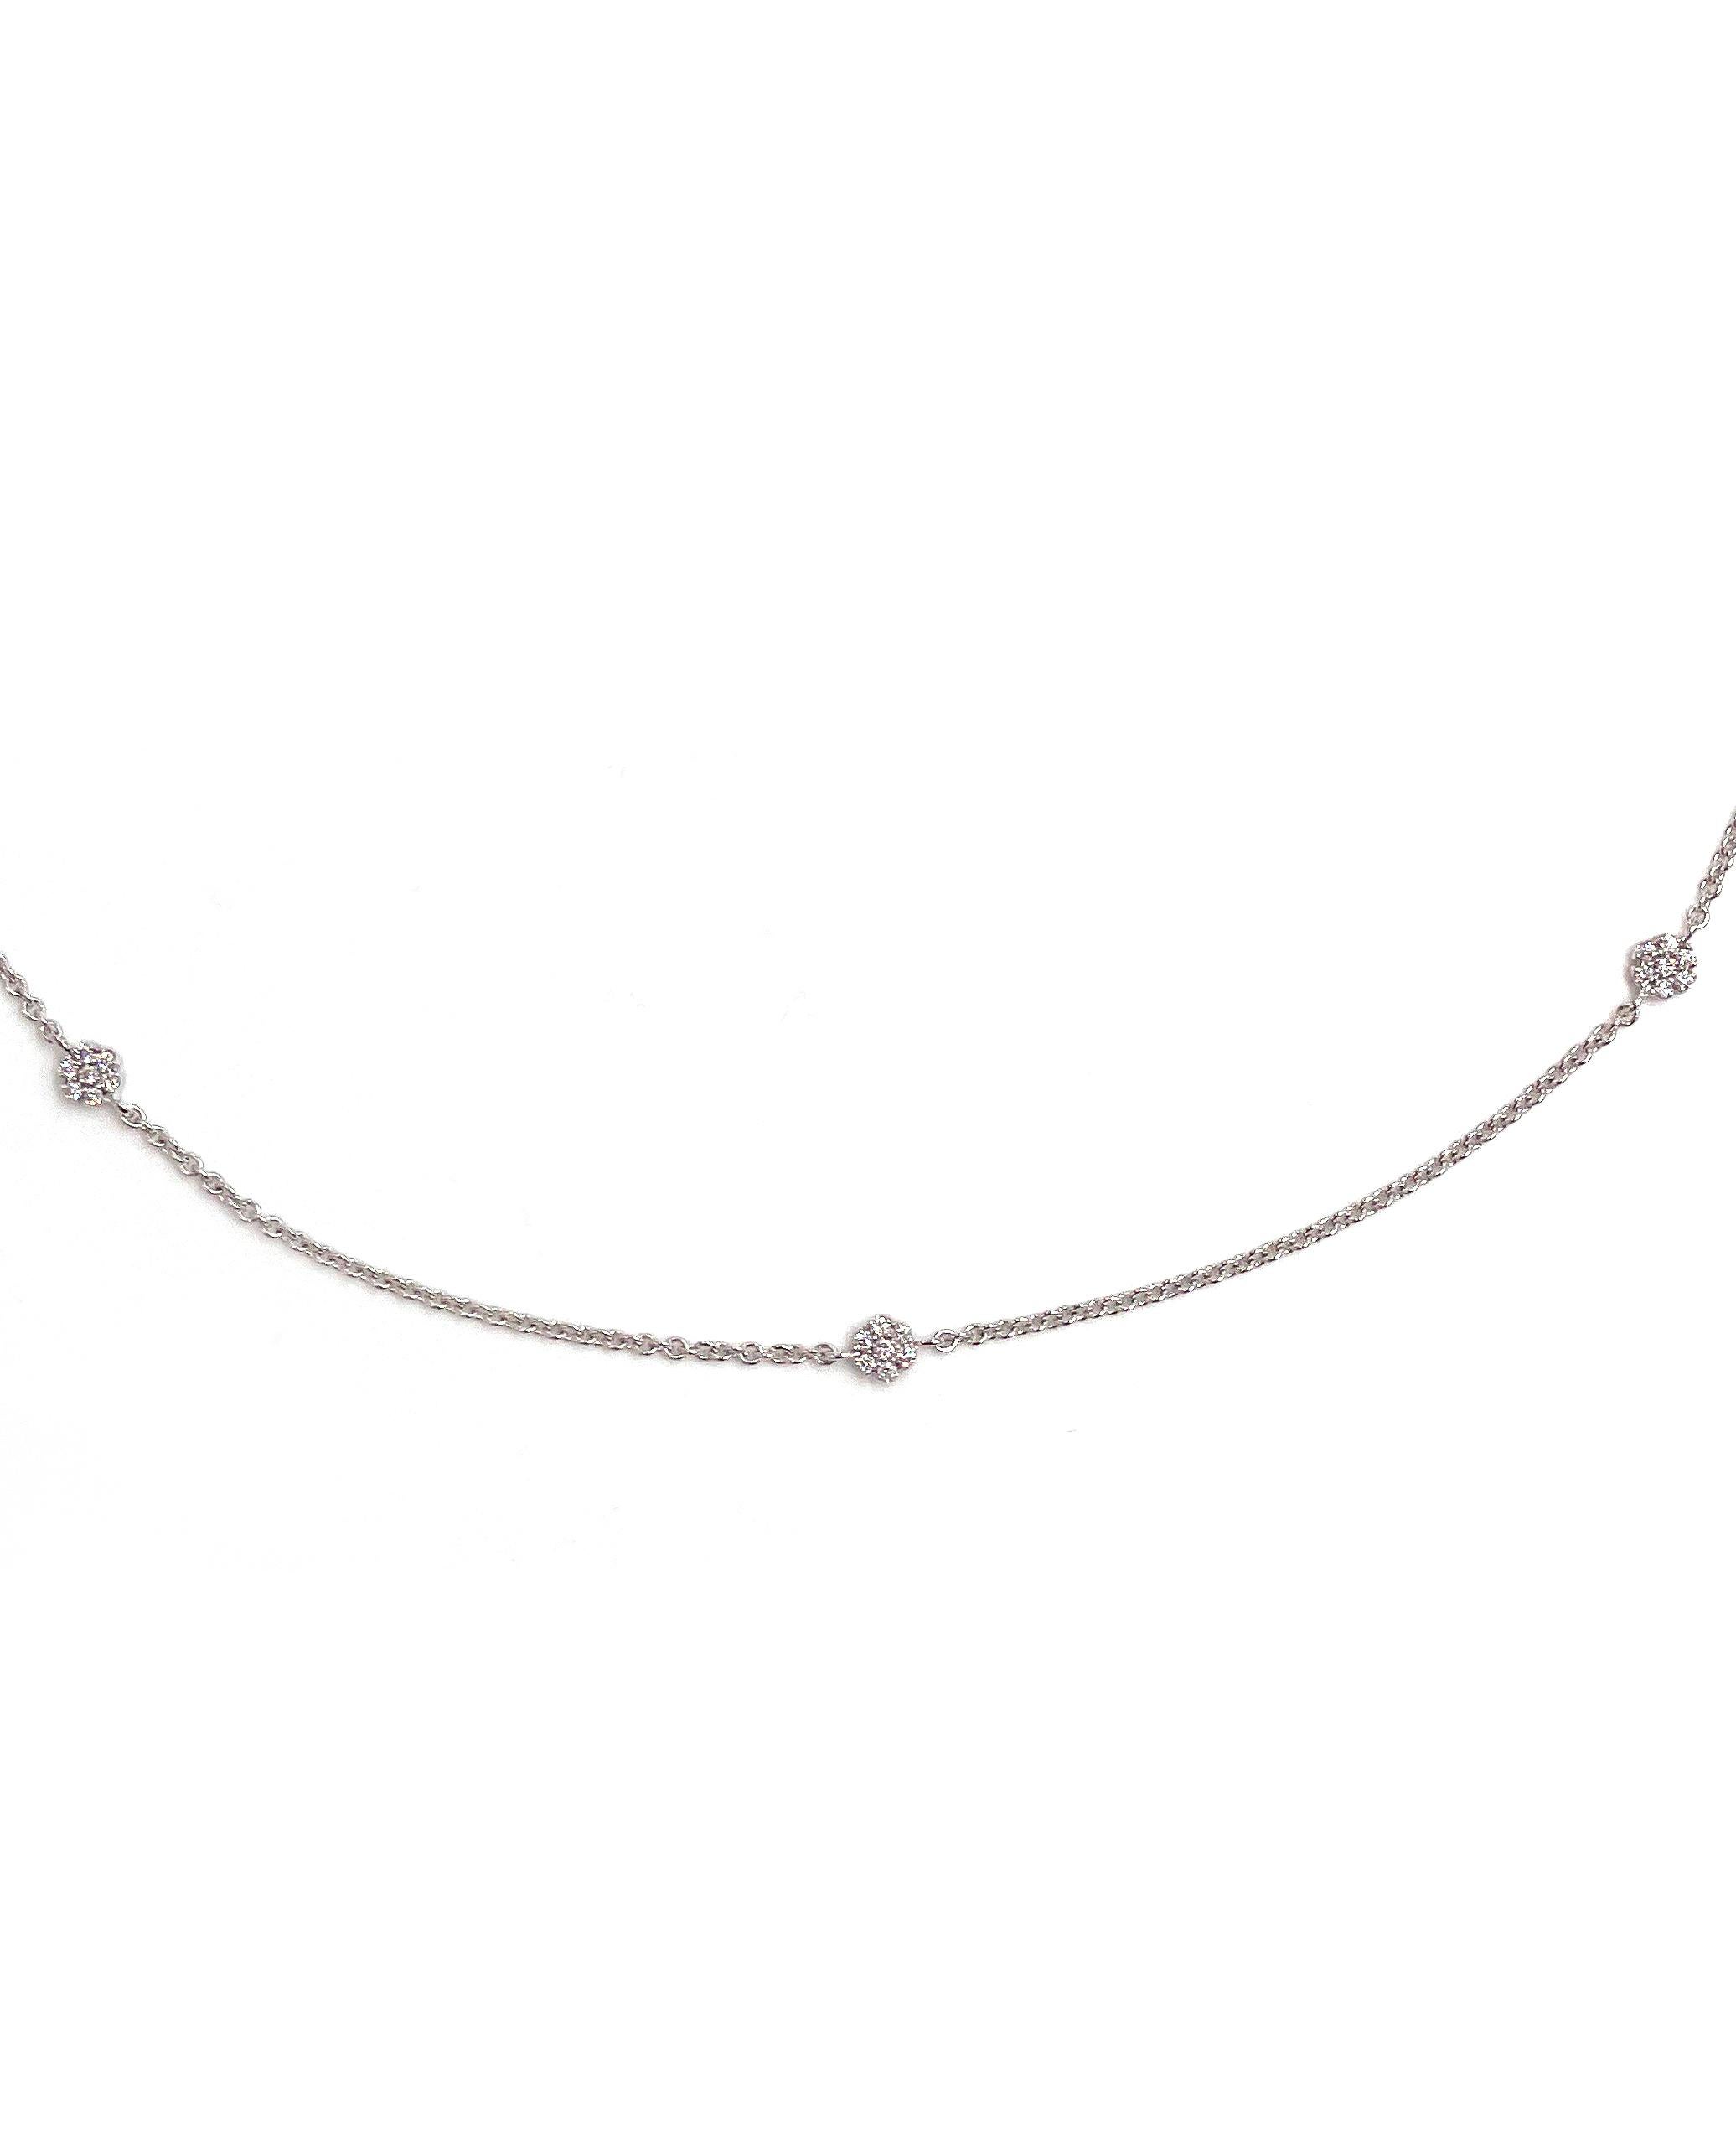 Simon G. 18K White Gold Chain with Double Sided Diamond Stations. There are 98 Round Diamonds Weighing 0.56 carats Total.

*Adjustable 16-18 inches